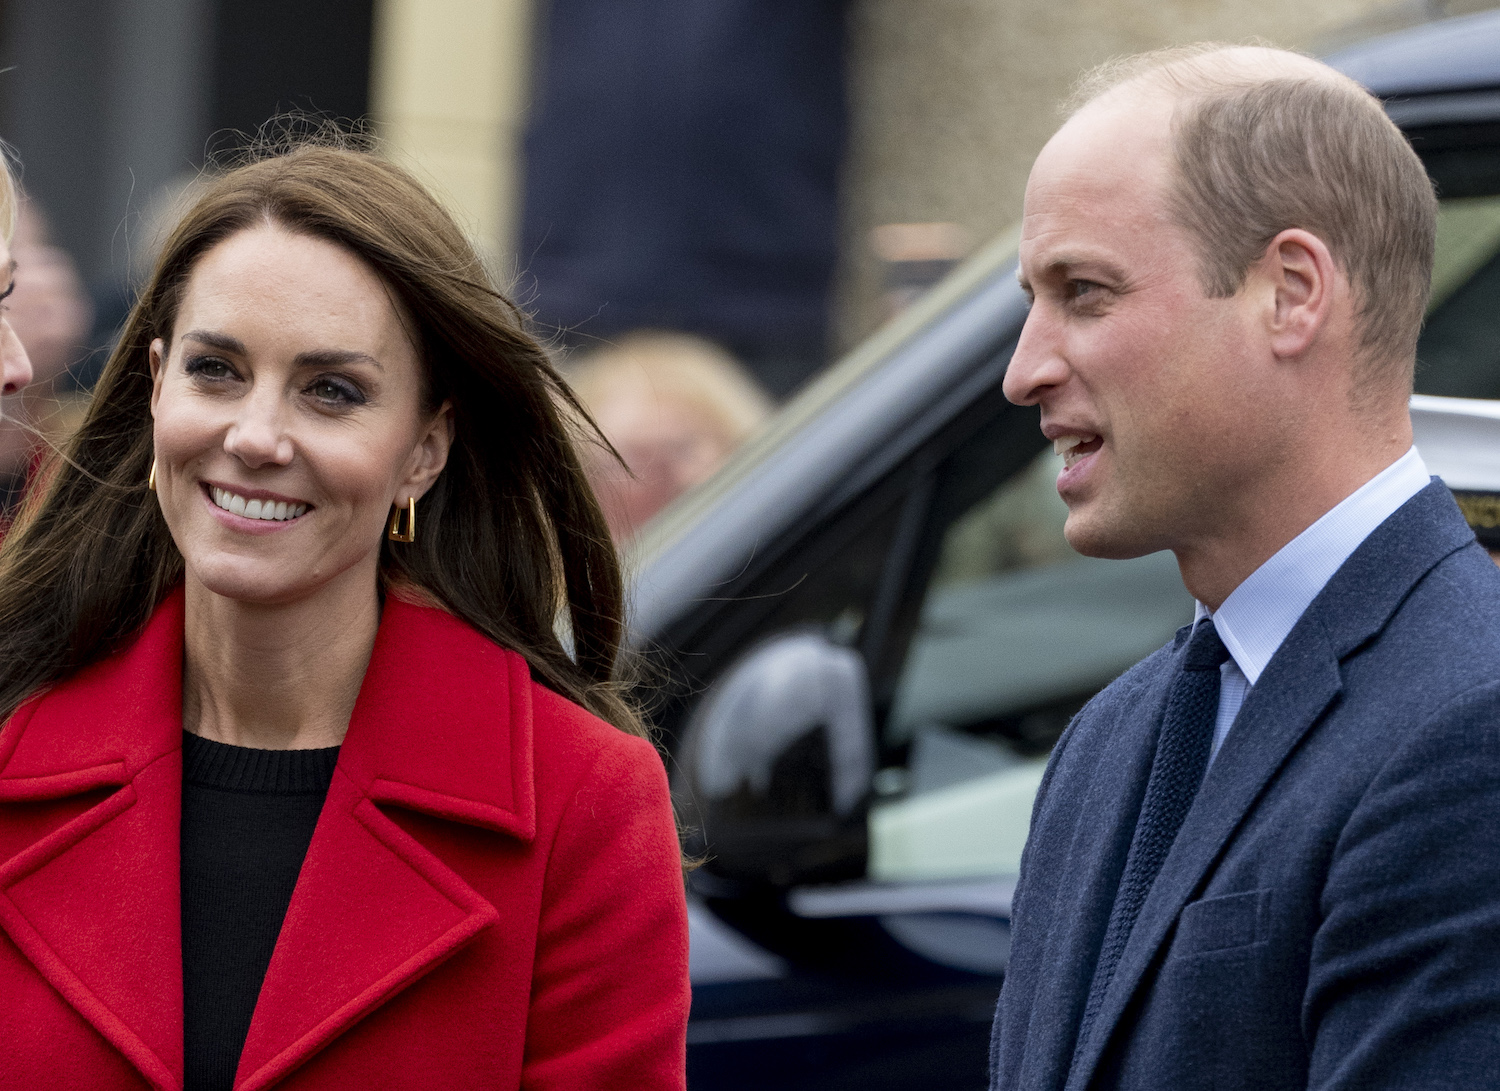 Kate Middleton wears a red coat and Prince William wears a suit and toes with the couple's body language revealing confidence